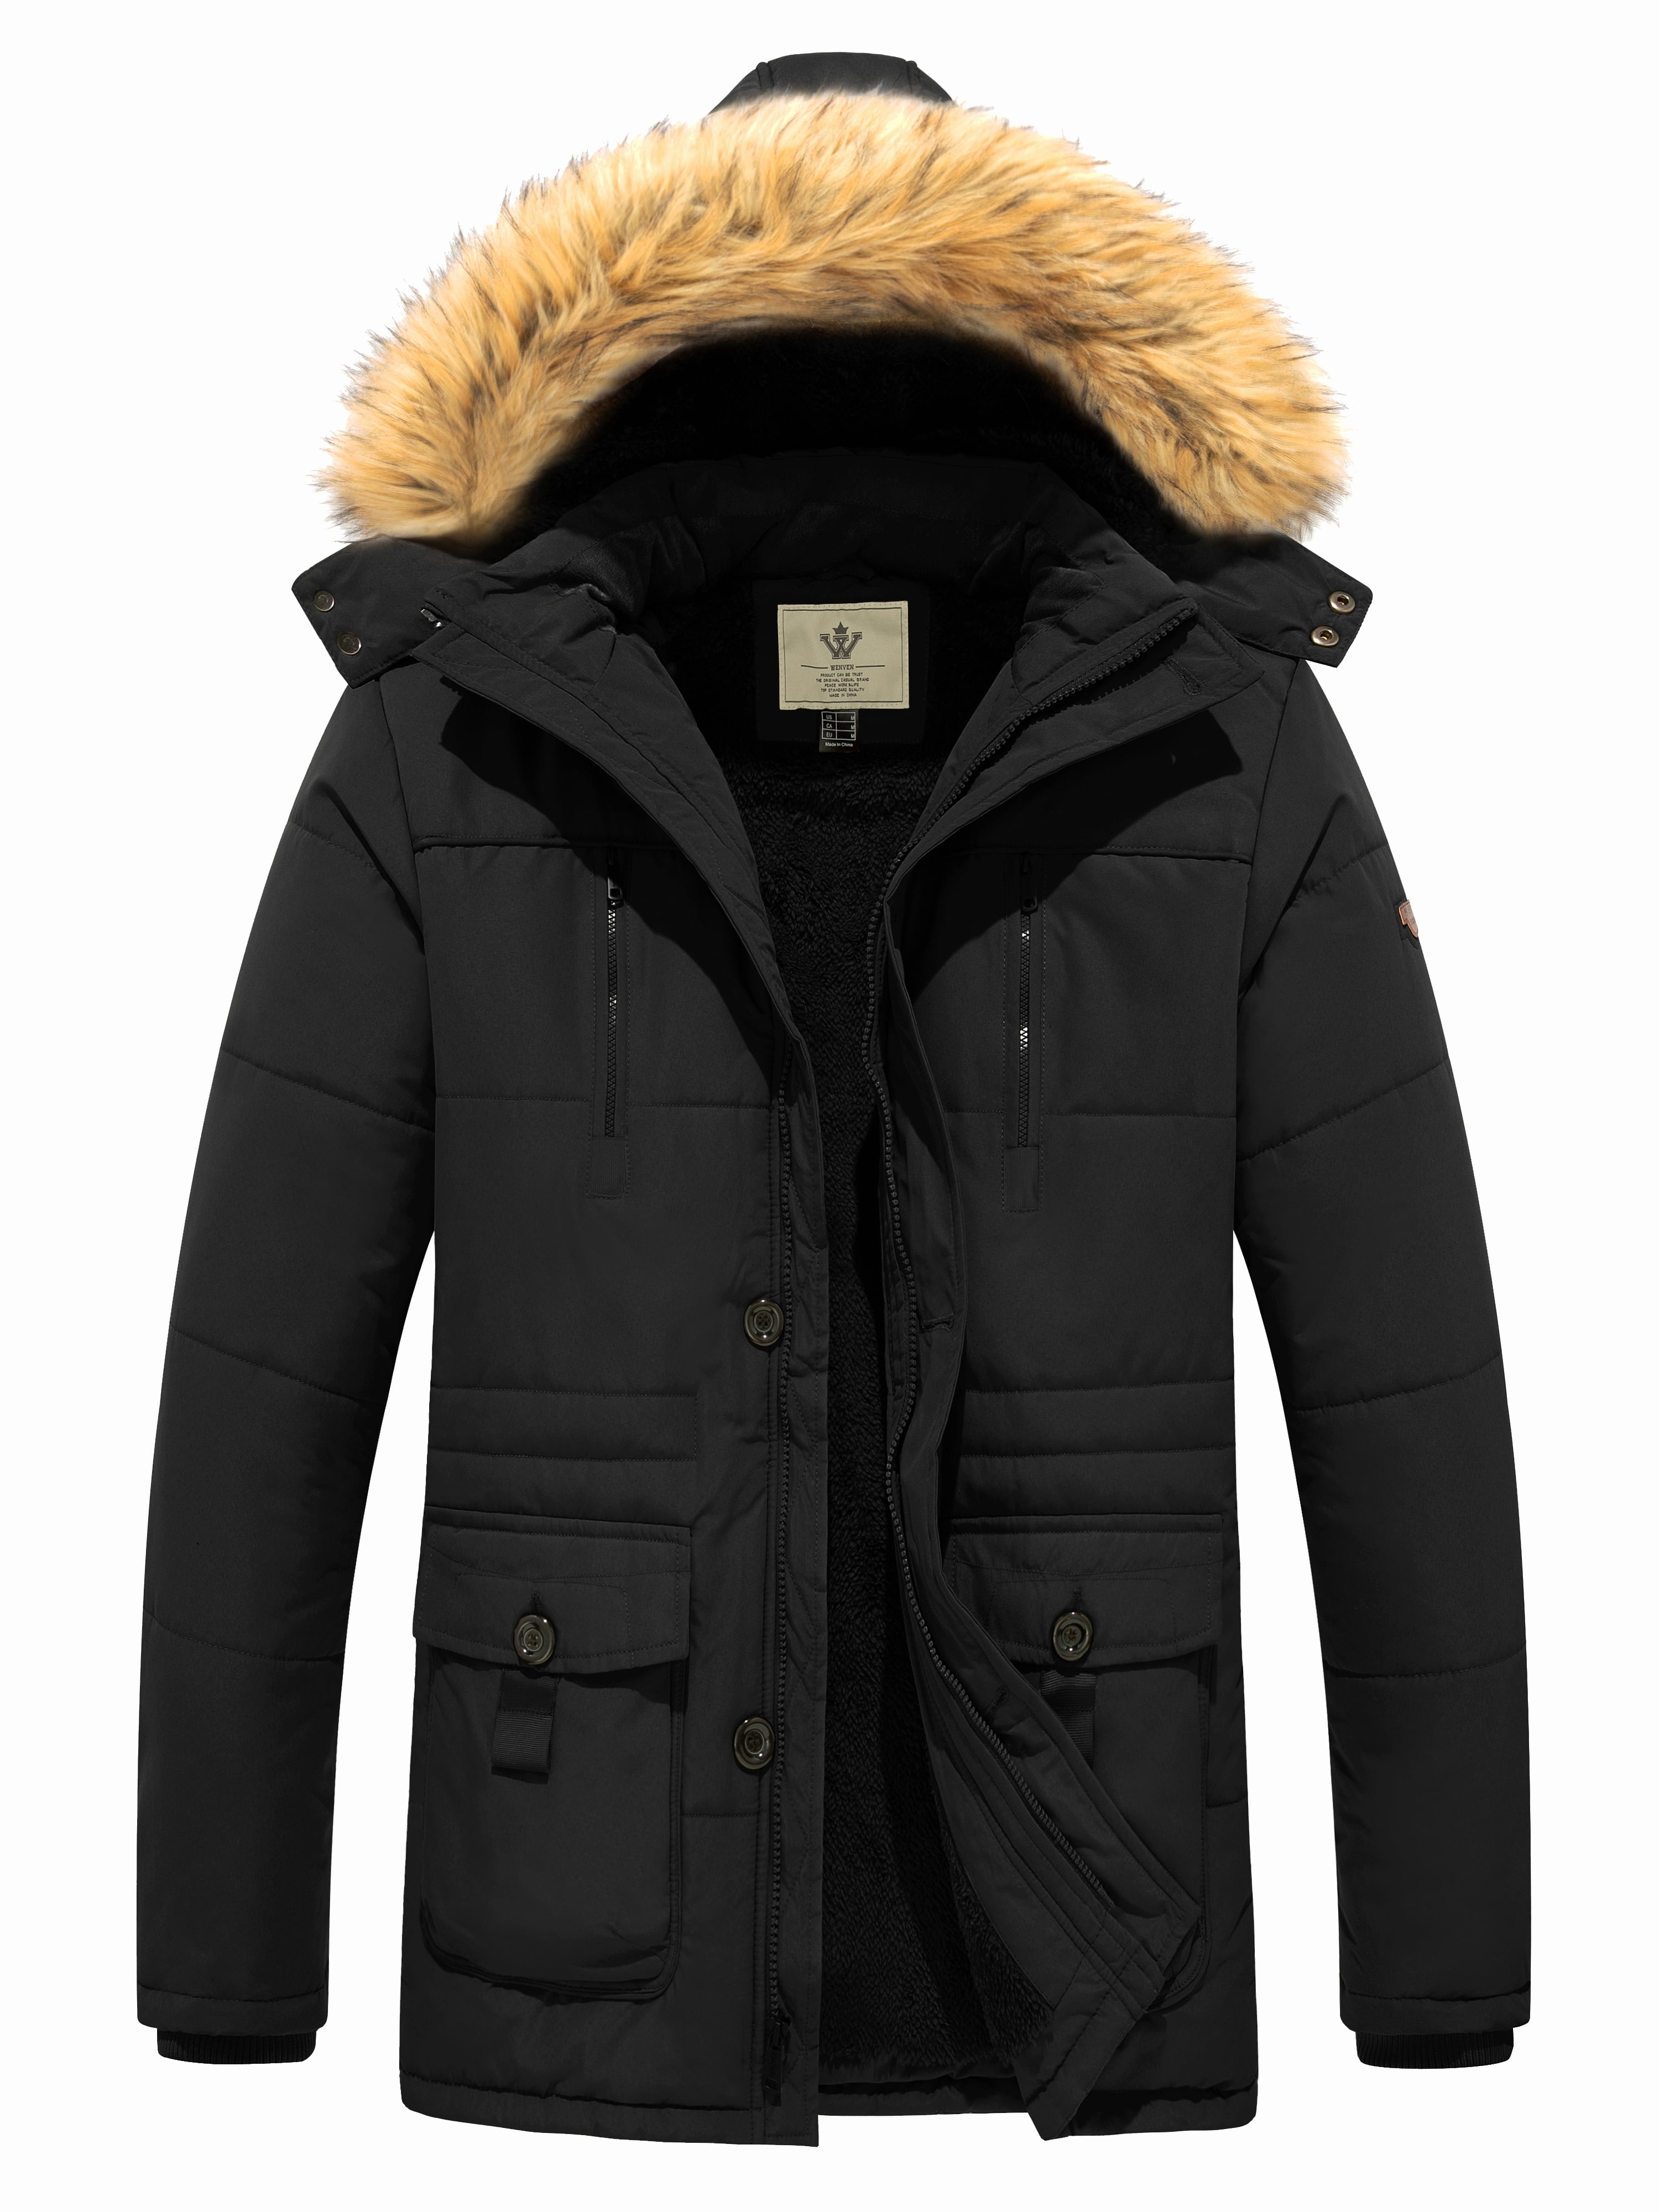 Big and Tall Mens Winter Coats Clearance.Mens Winter Color Collision Cotton Jacket Thickening Warm Cotton Padded Coat 